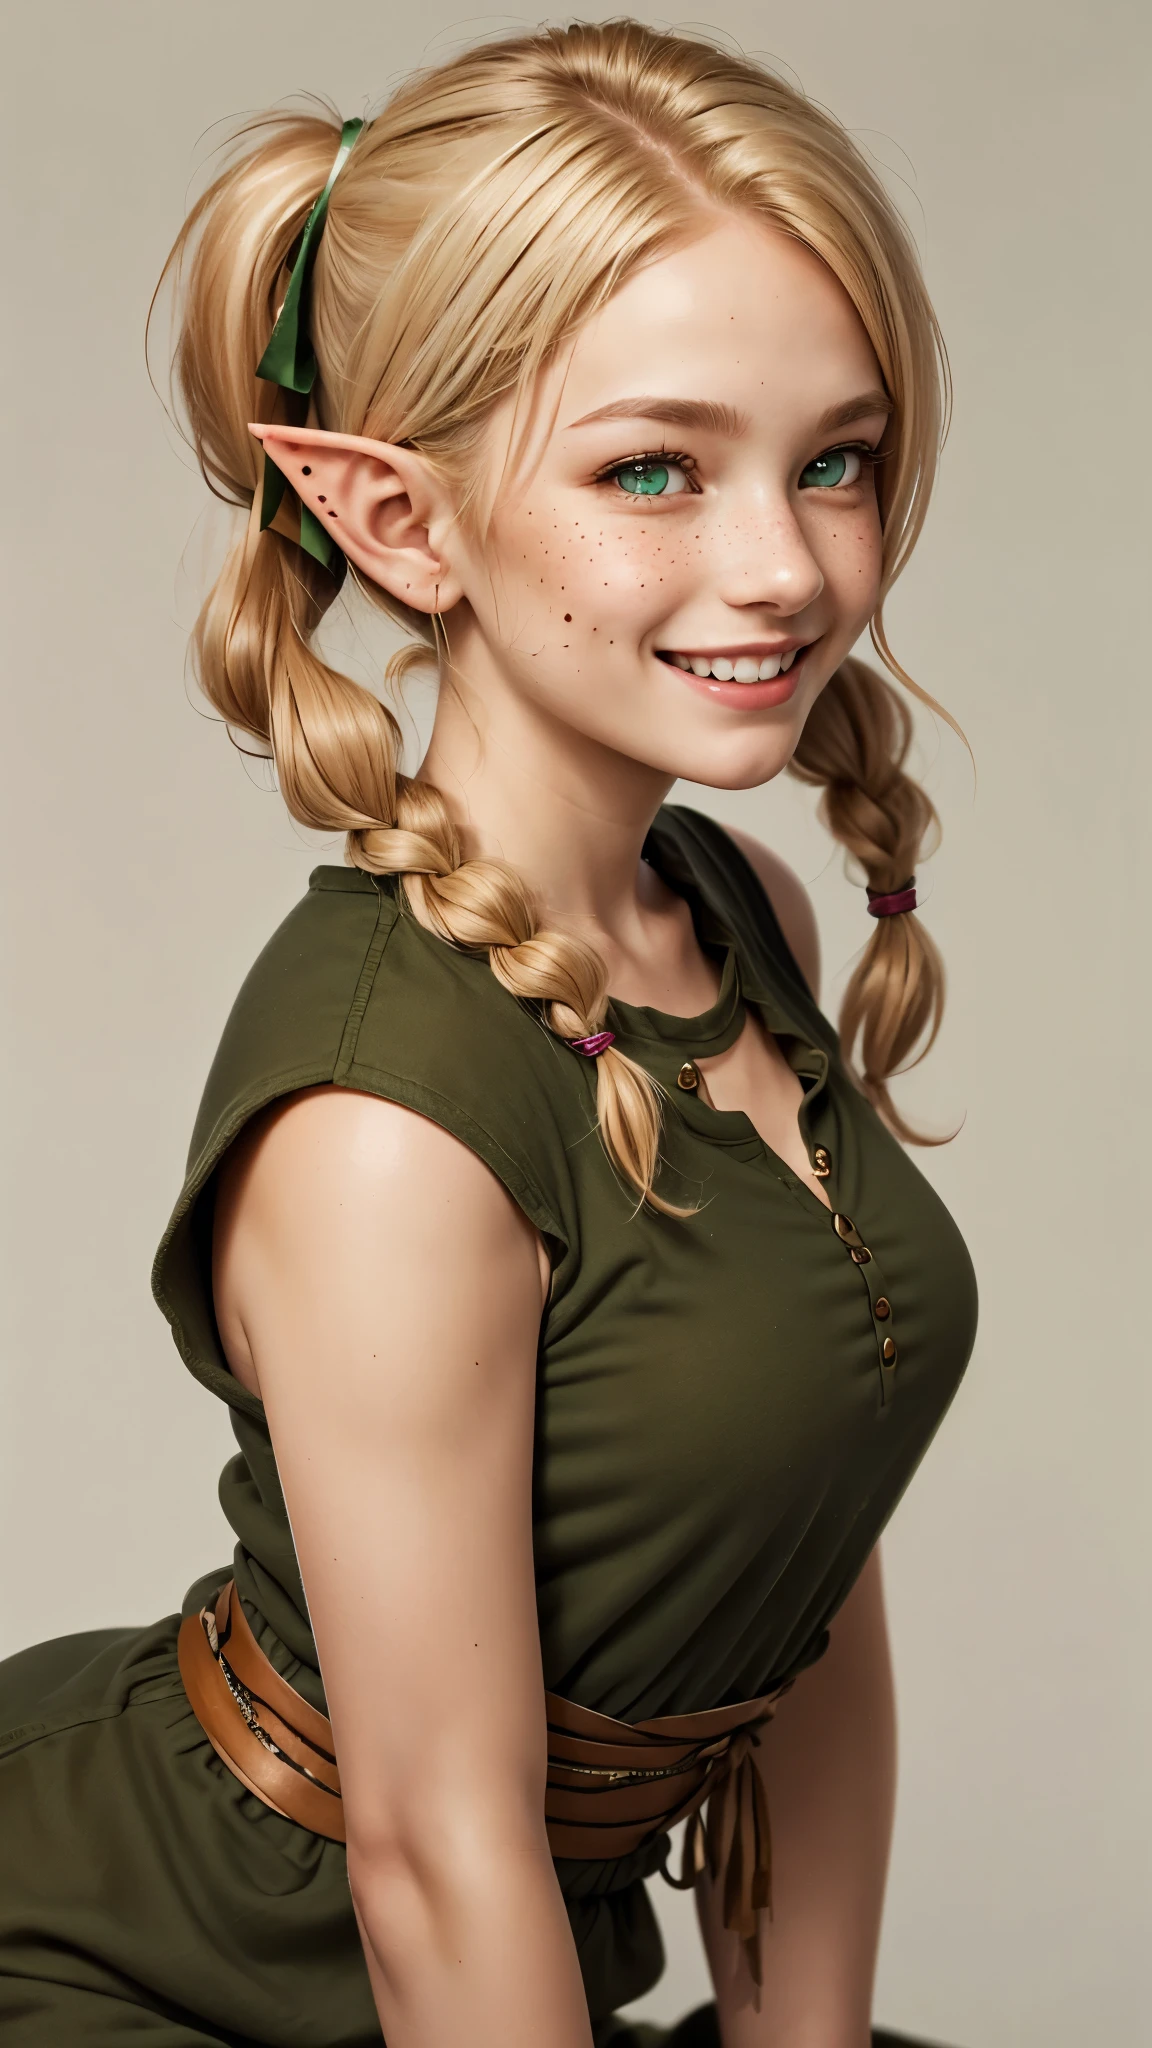 A 23-year old caucasian female elf with honey-blonde hair hair in pigtails and bright olive-green eyes. Freckles and a slight blush. Centered view. Laughing.